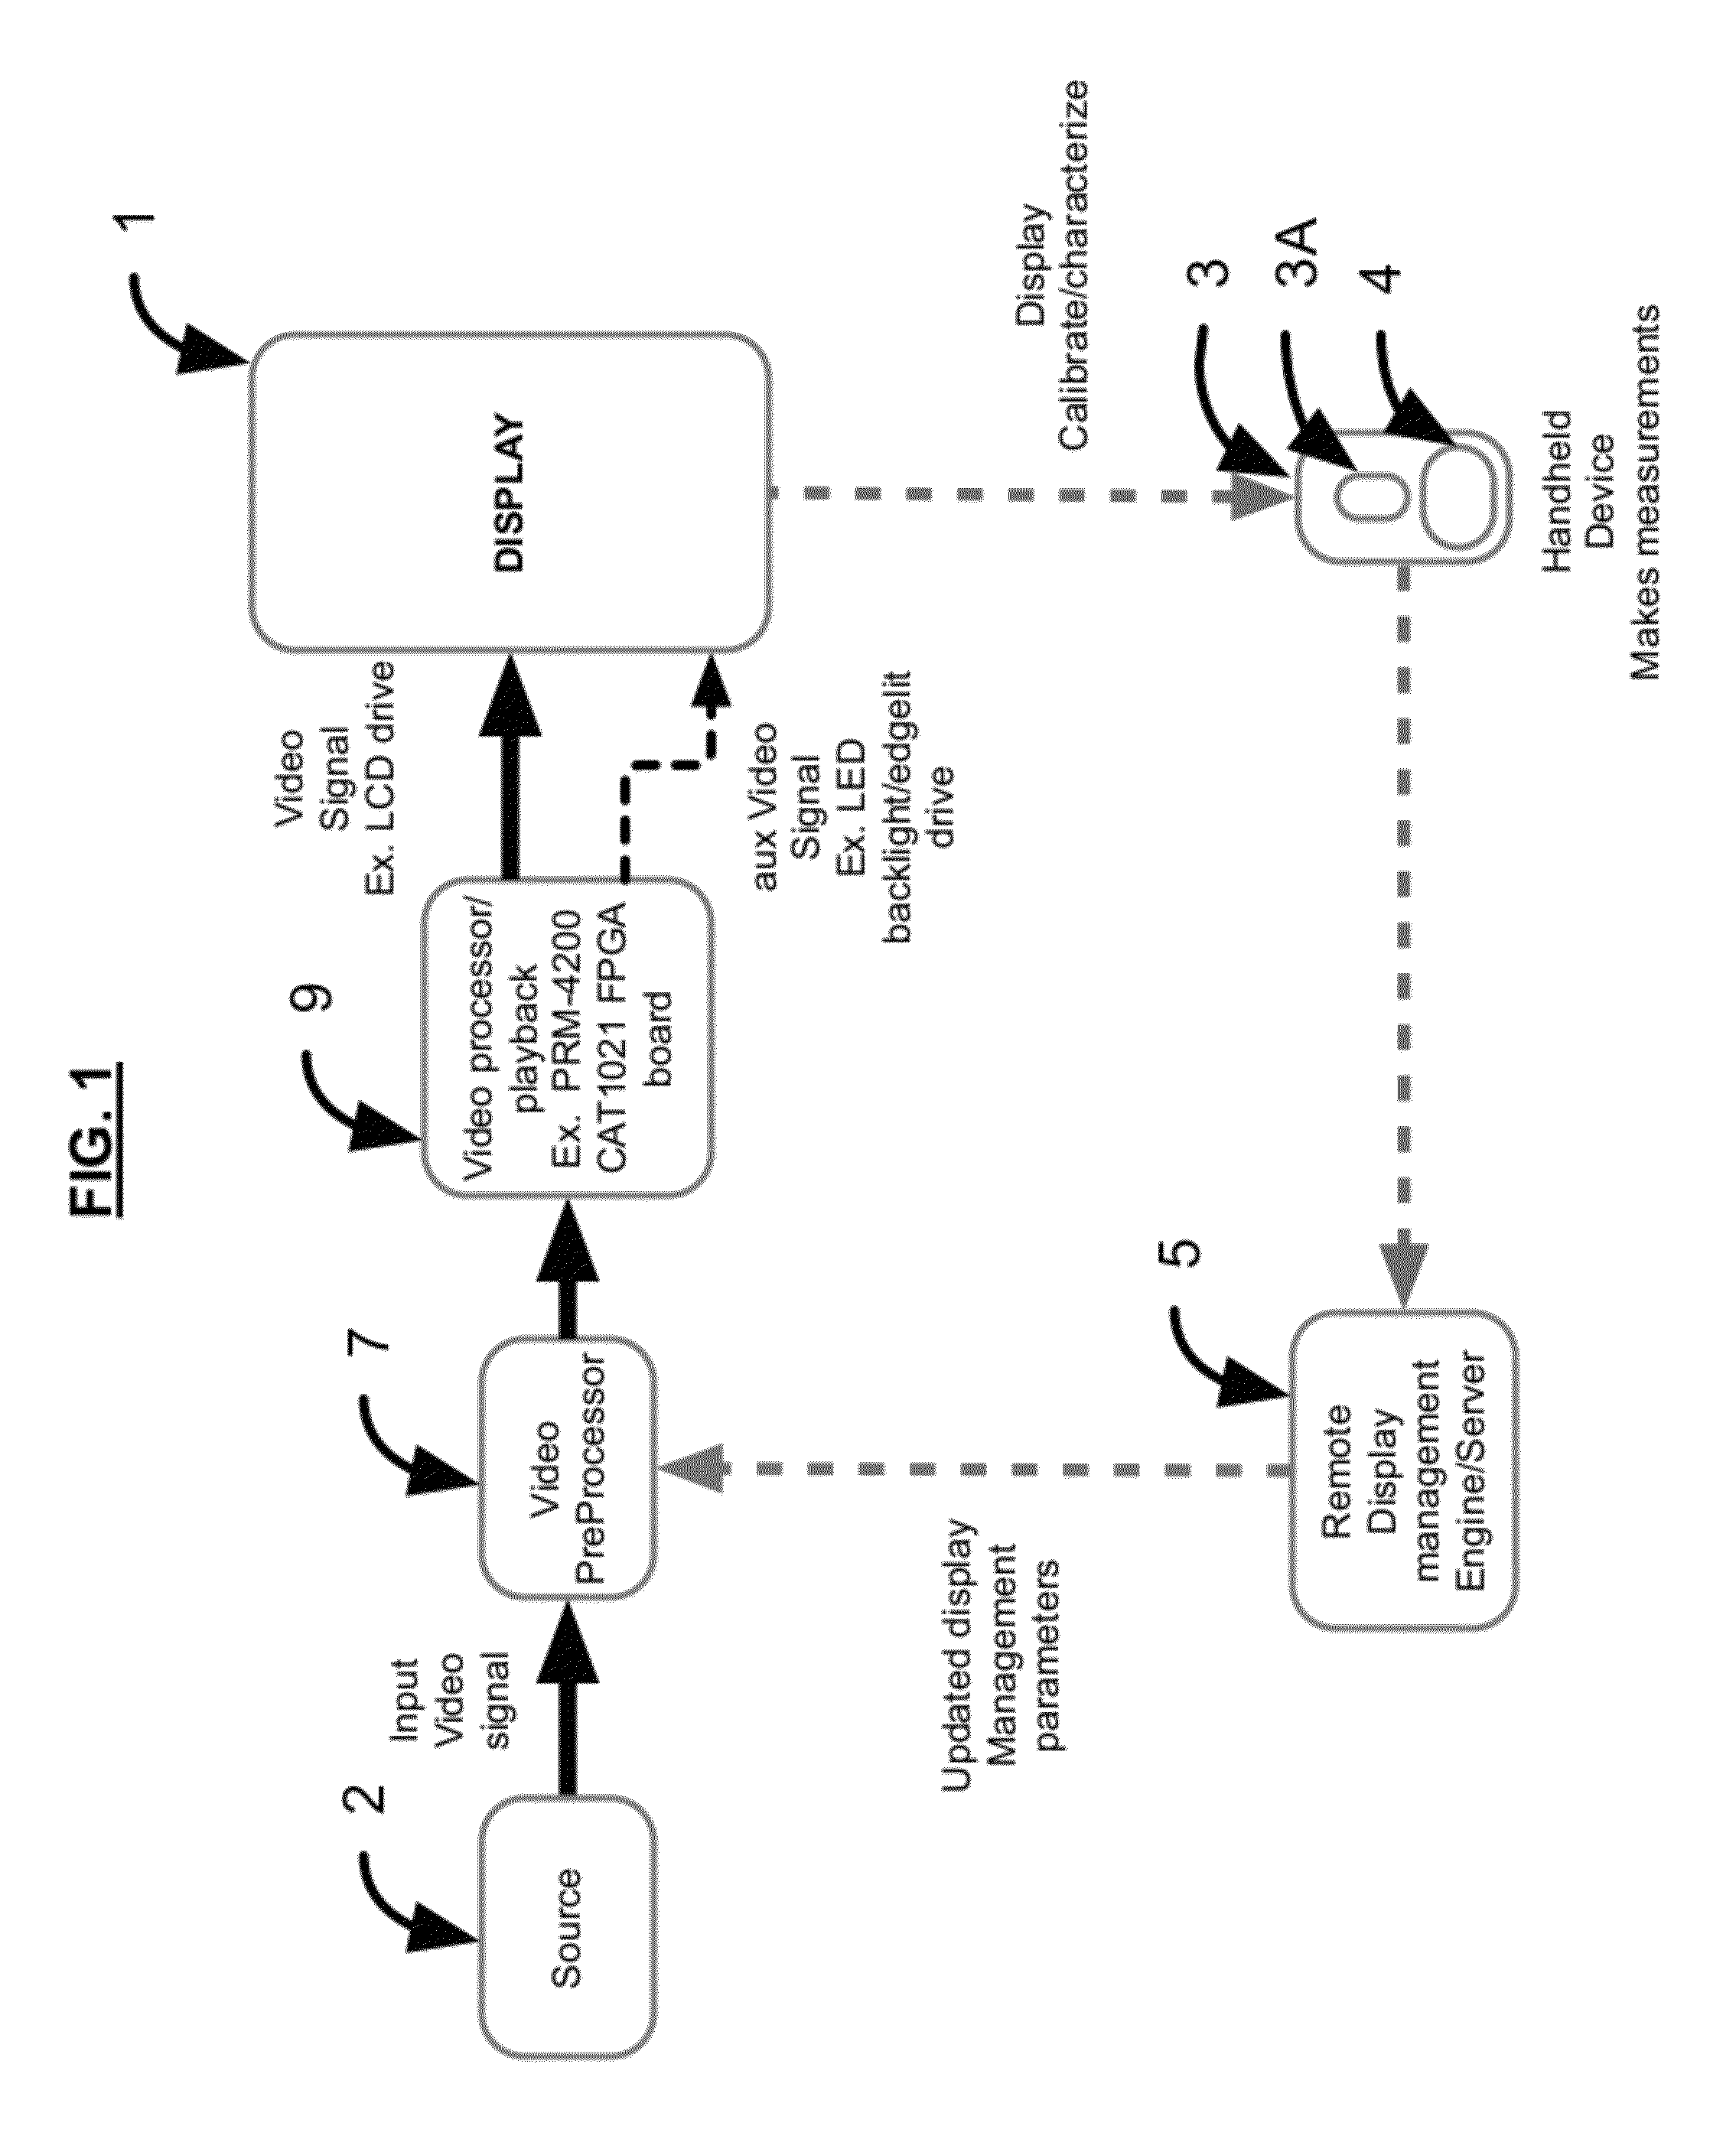 Method and system for 3D display calibration with feedback determined by a camera device